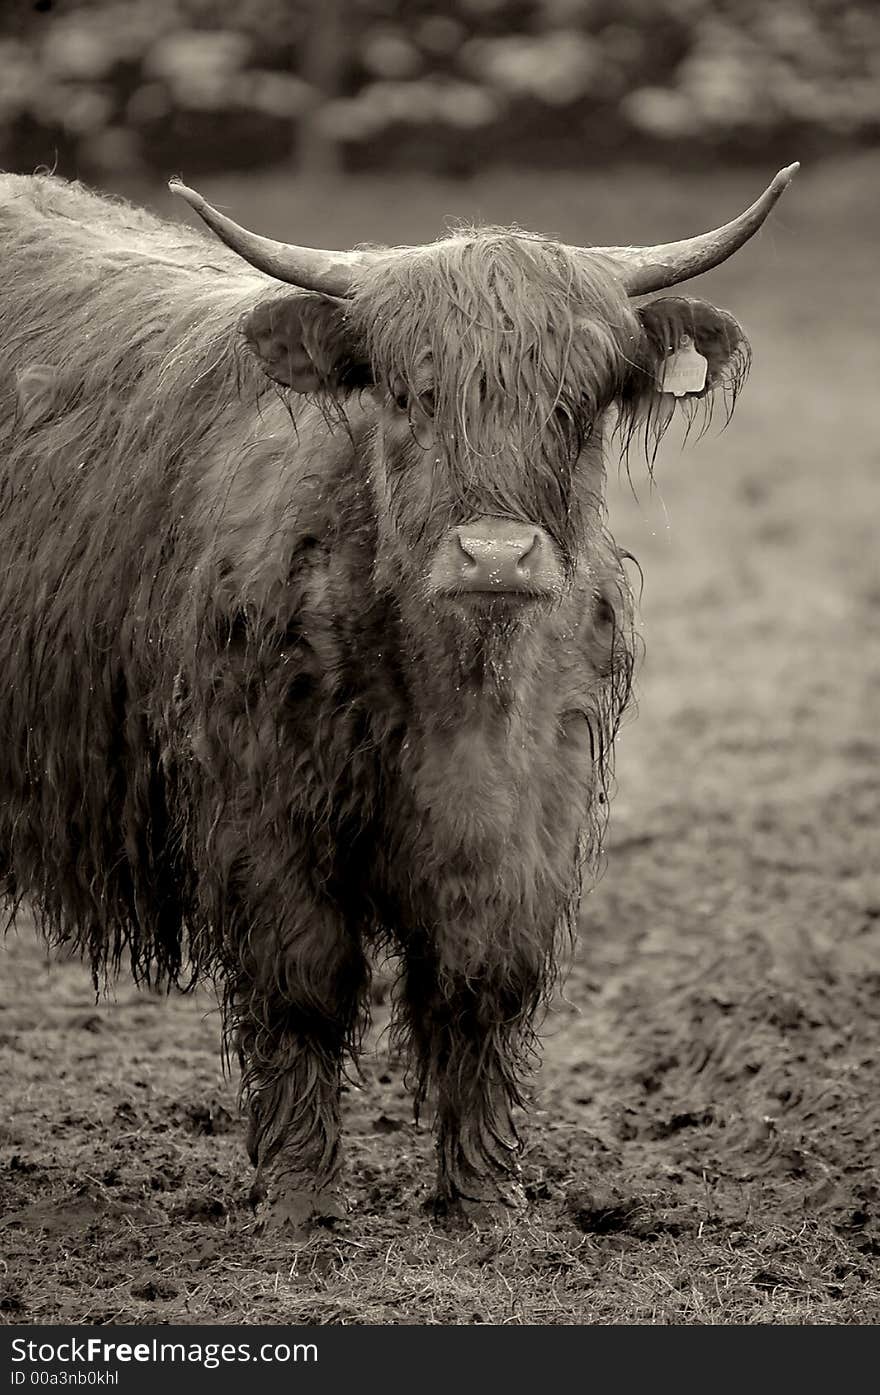 An image of a Highland Cow on a wet day in of course Perthshire in Scotland